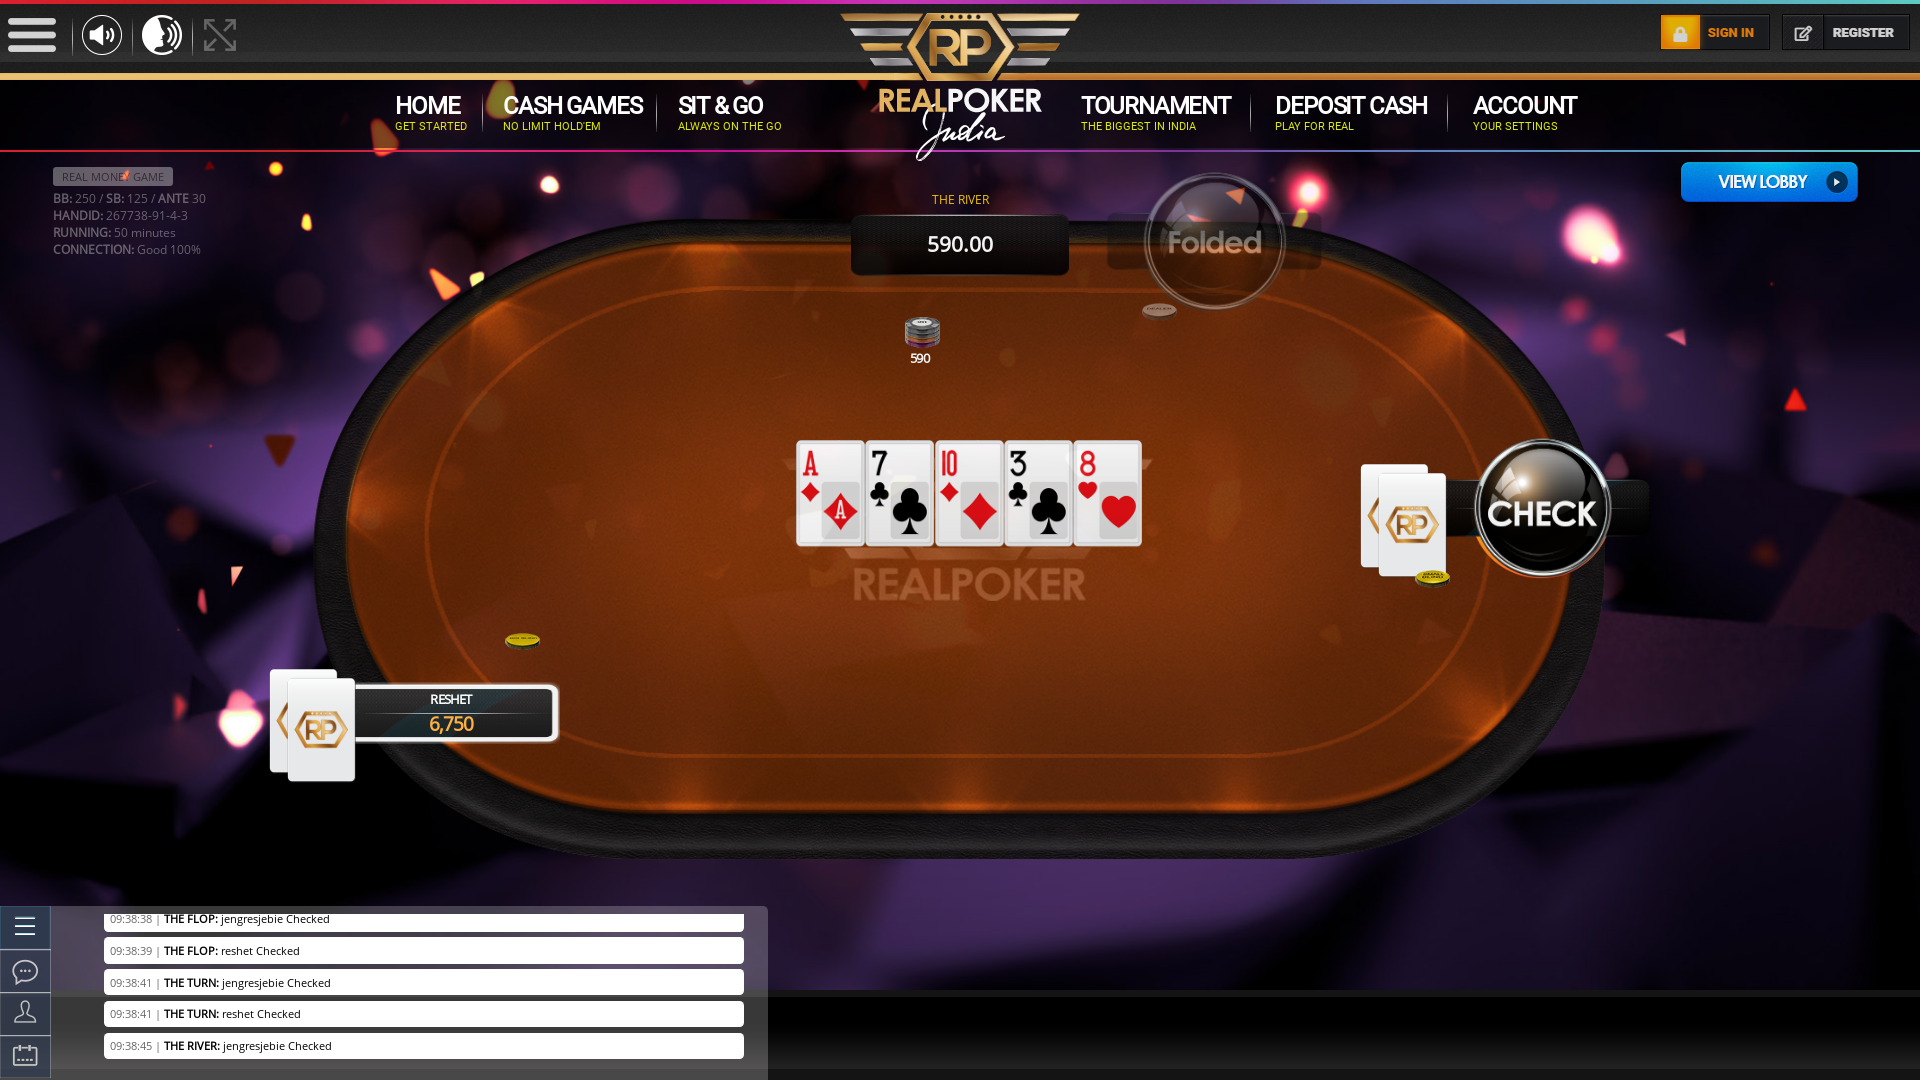 Online poker on a 10 player table in the 50th minute match up